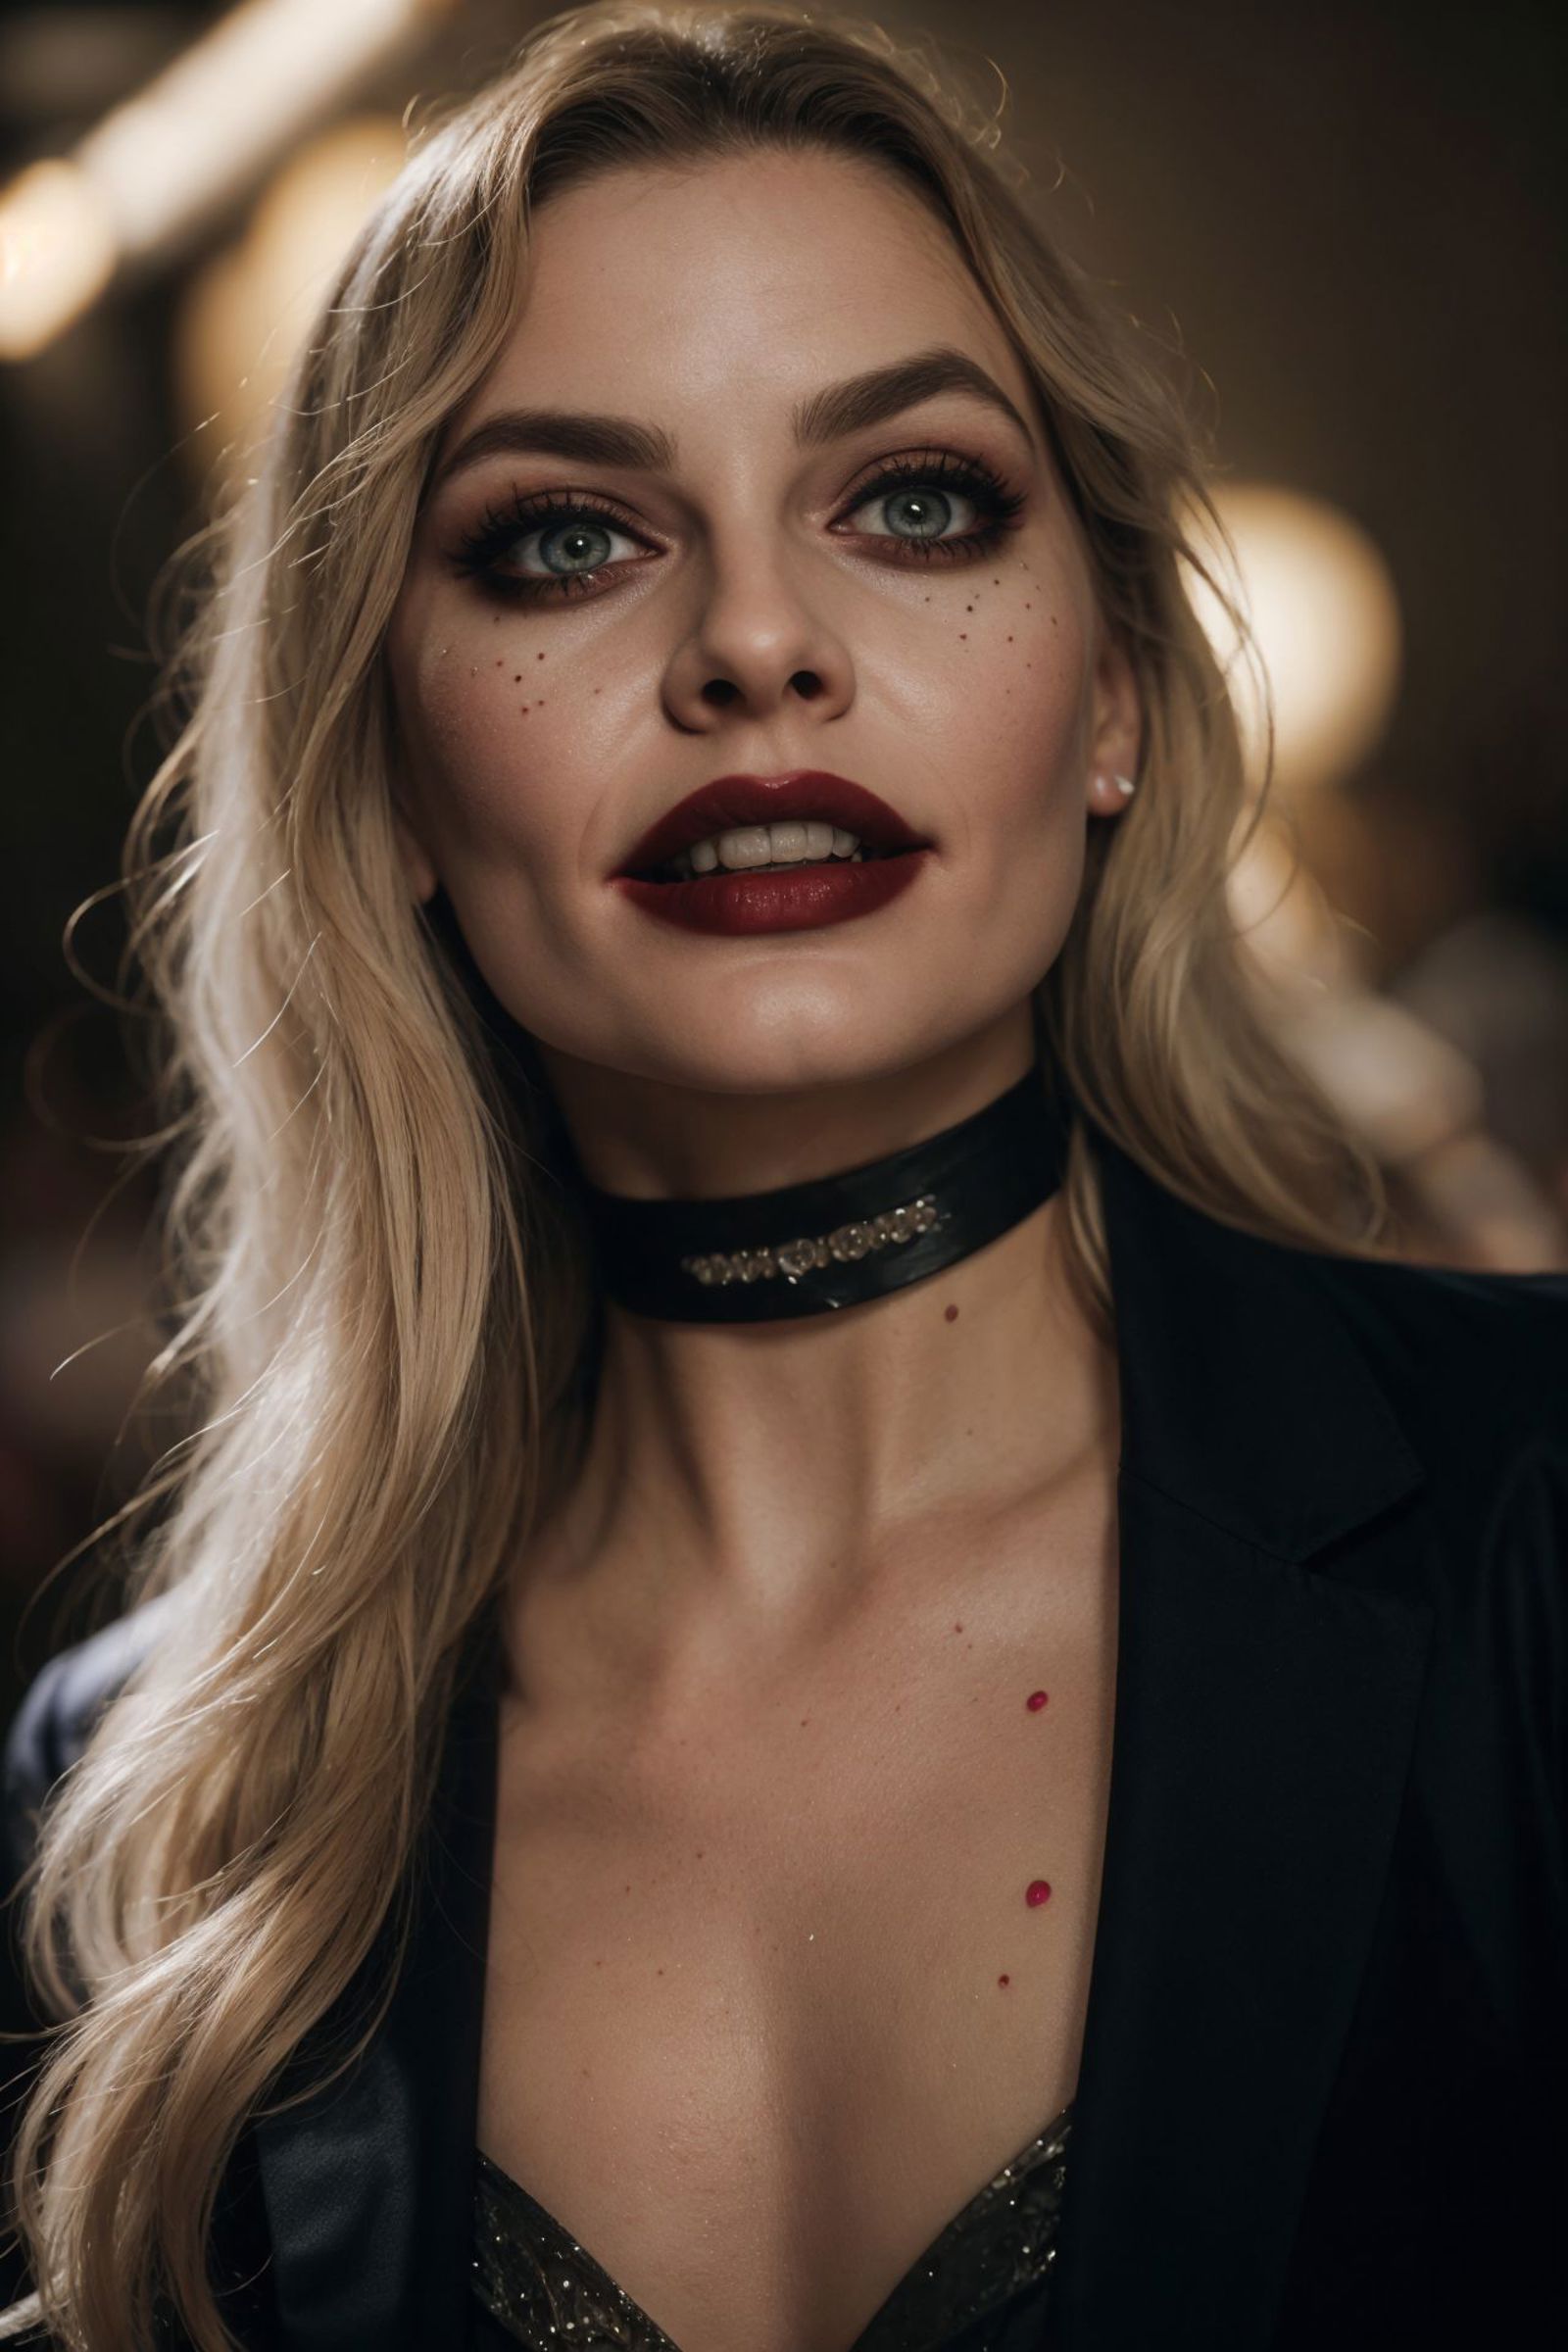 Margot Robbie – Actress image by tr4egg935